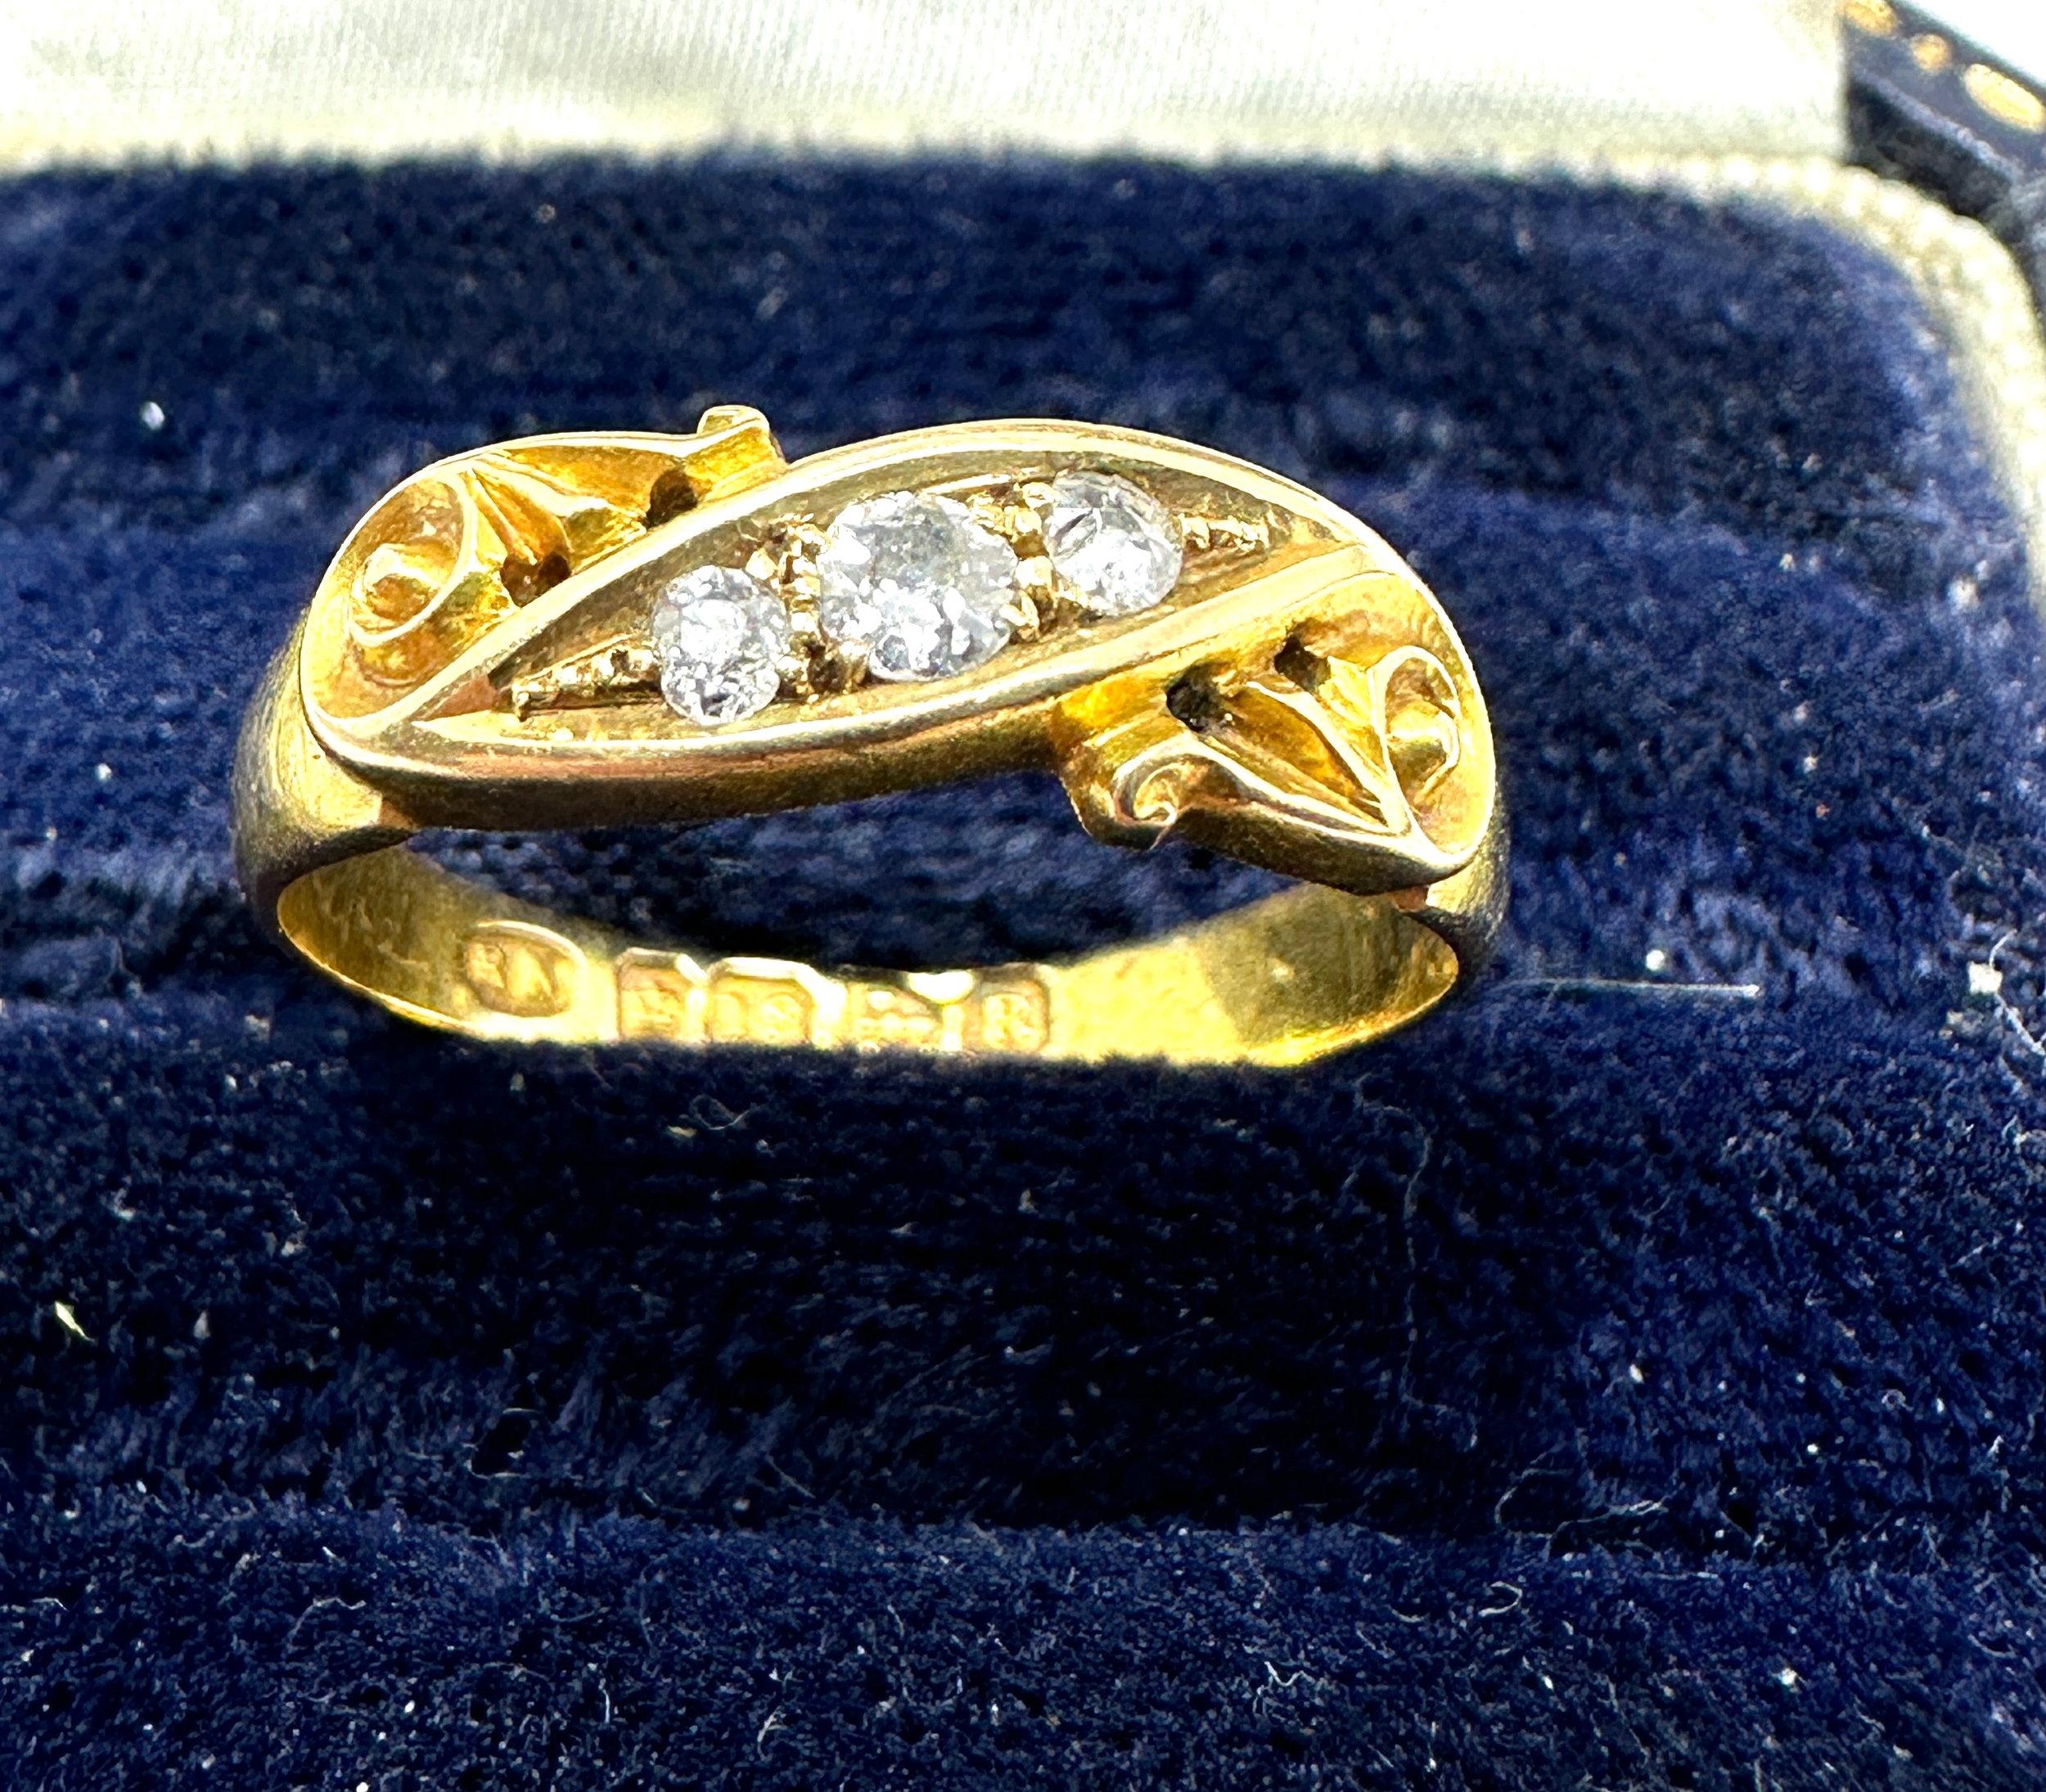 Antique 18ct gold diamond ring weight 2.6g